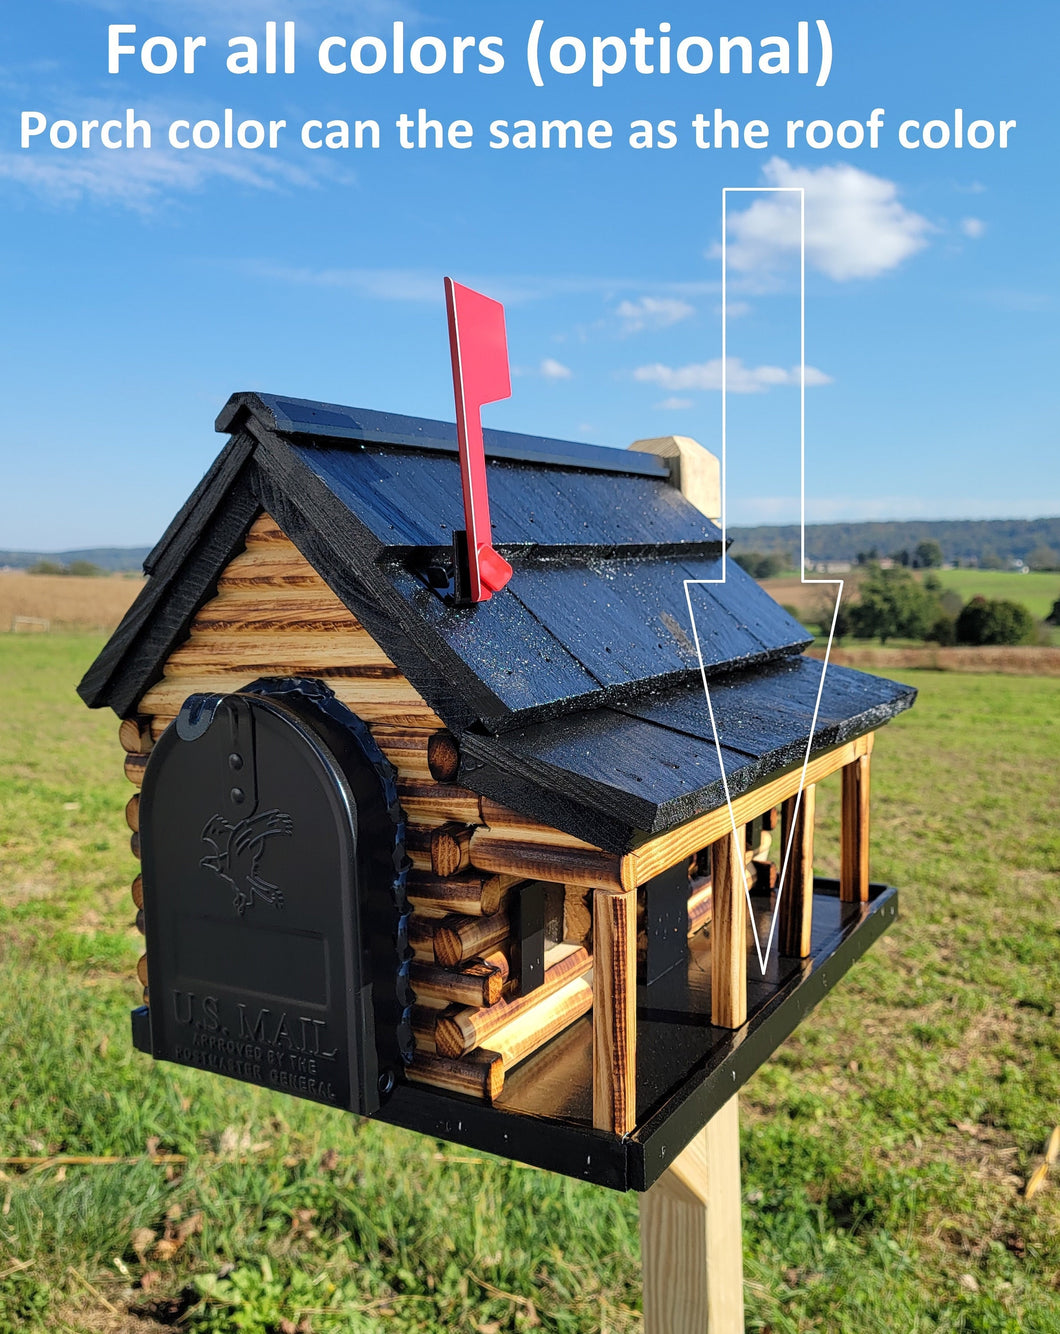 Amish Mailbox - Handmade - Log Cabin Style - Wooden with Metal USPS Approved Mailbox Outdoor